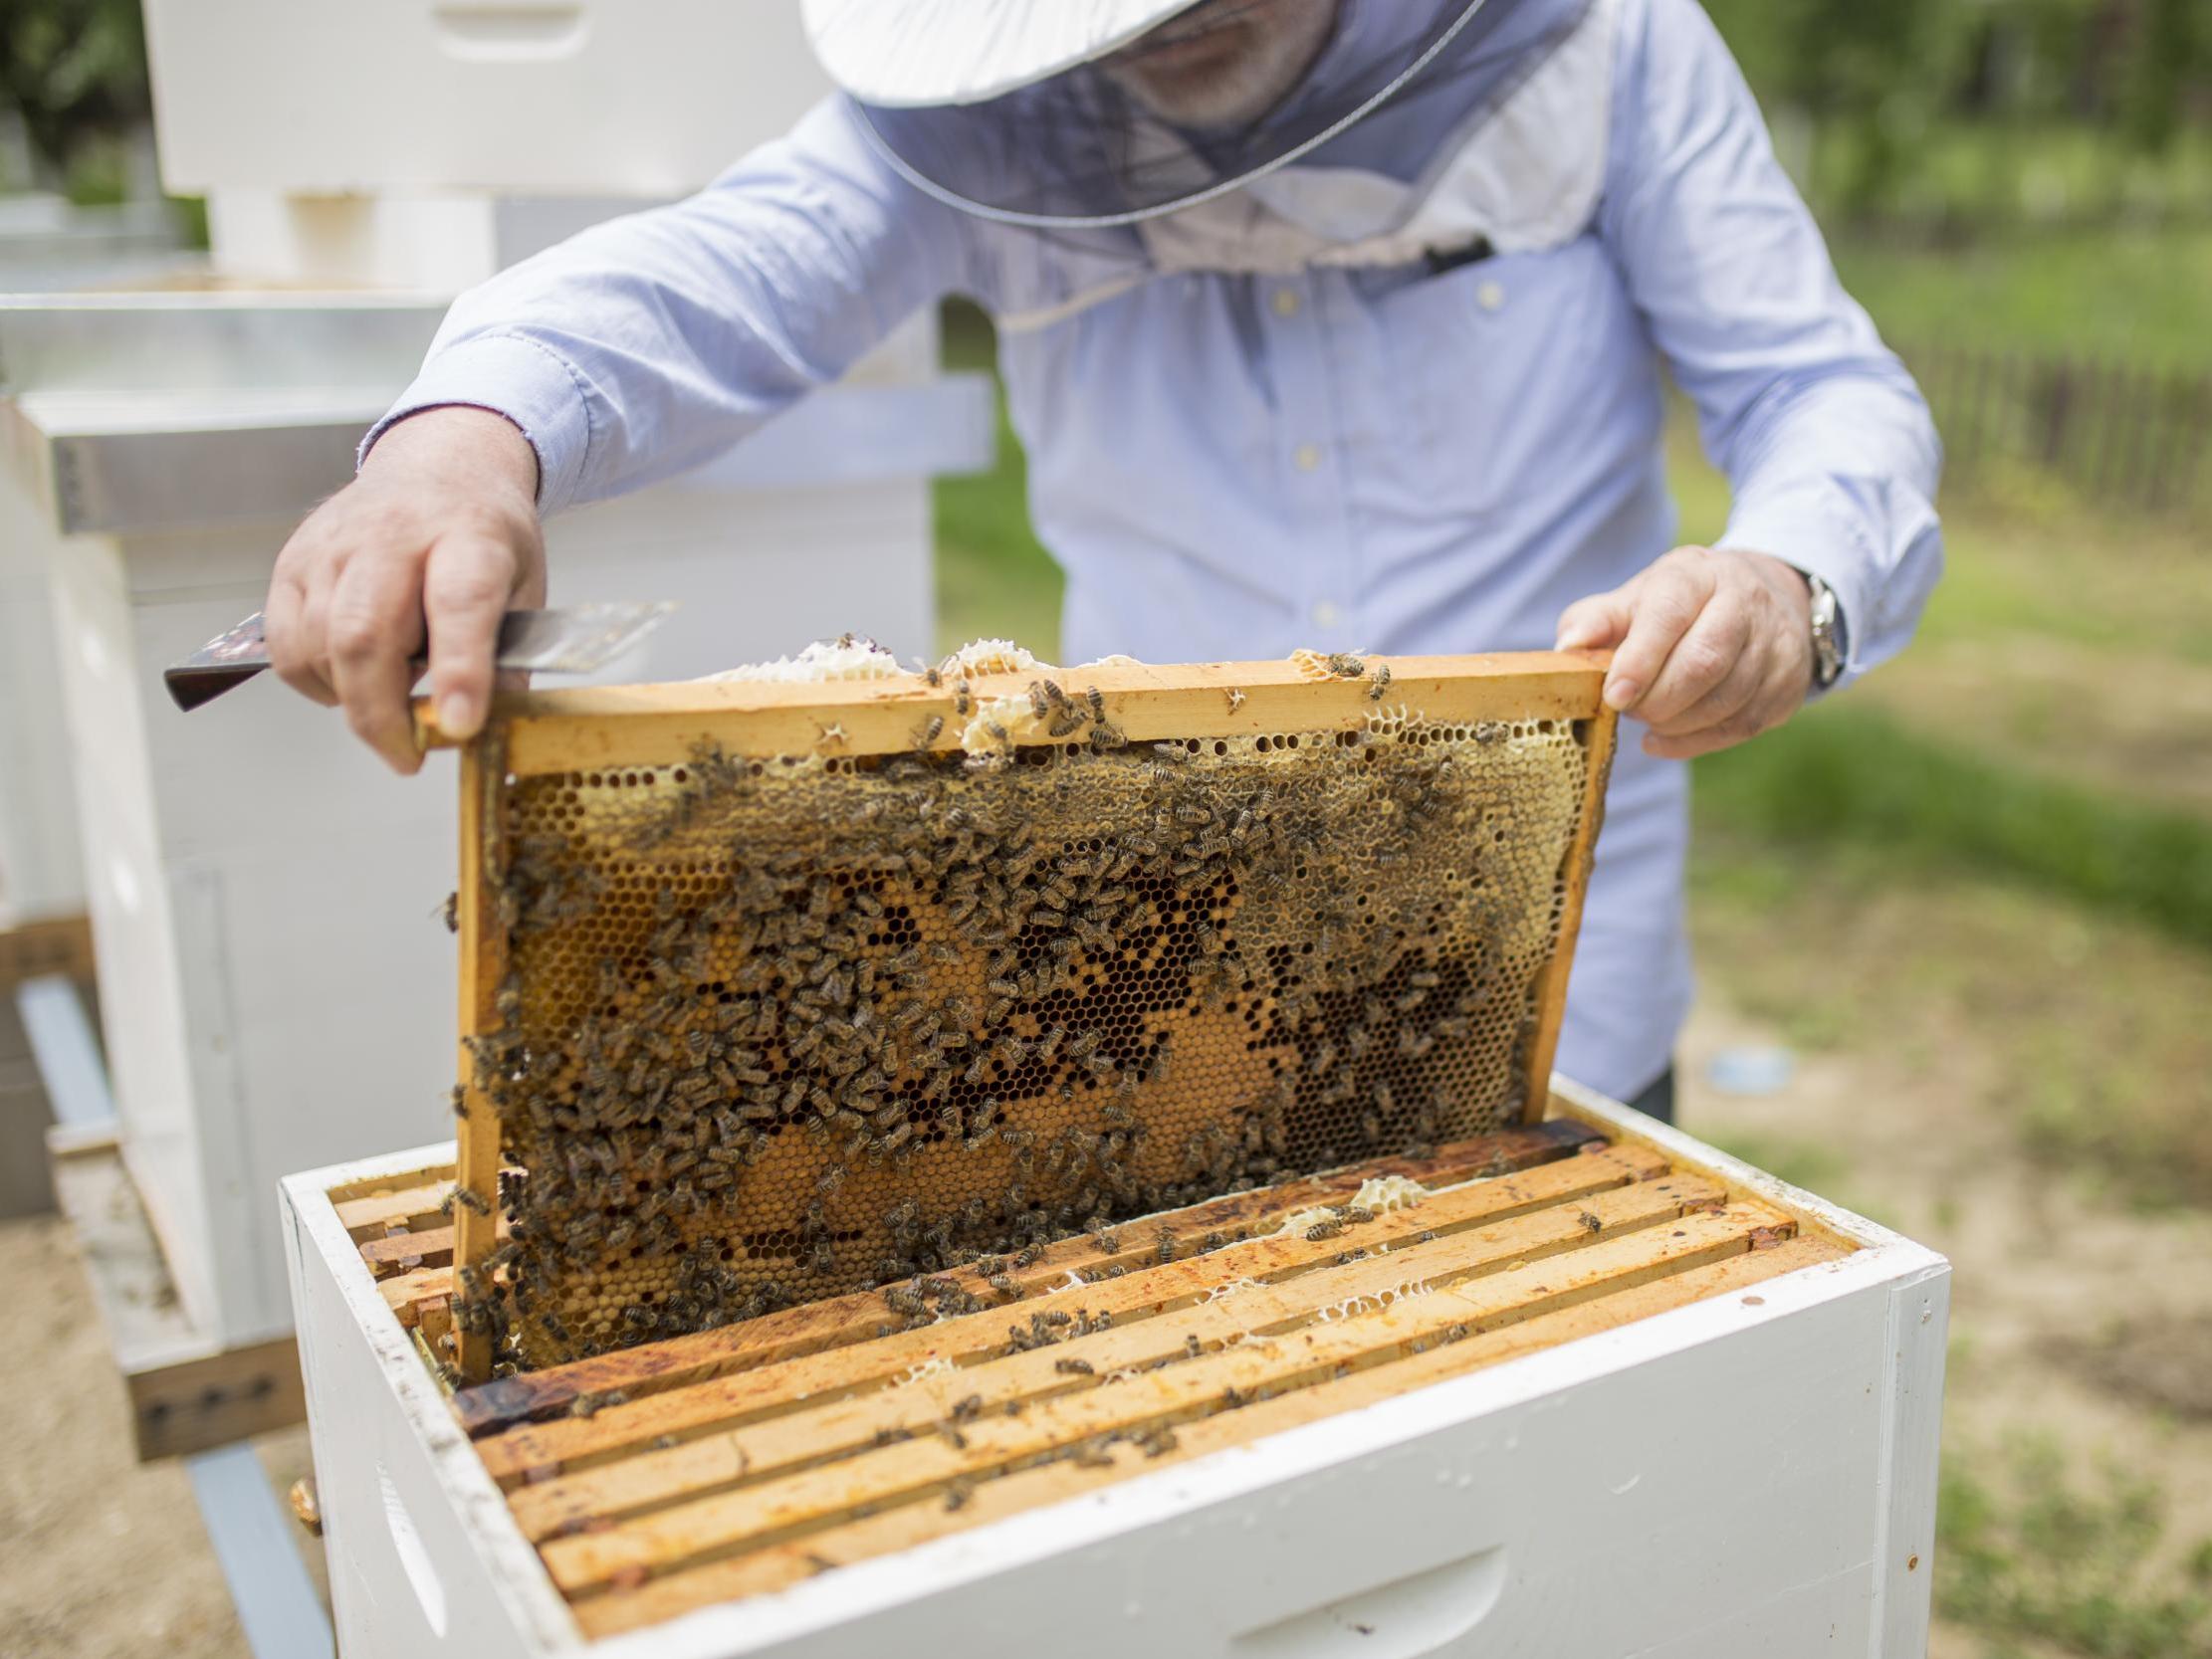 File image of bee hive.